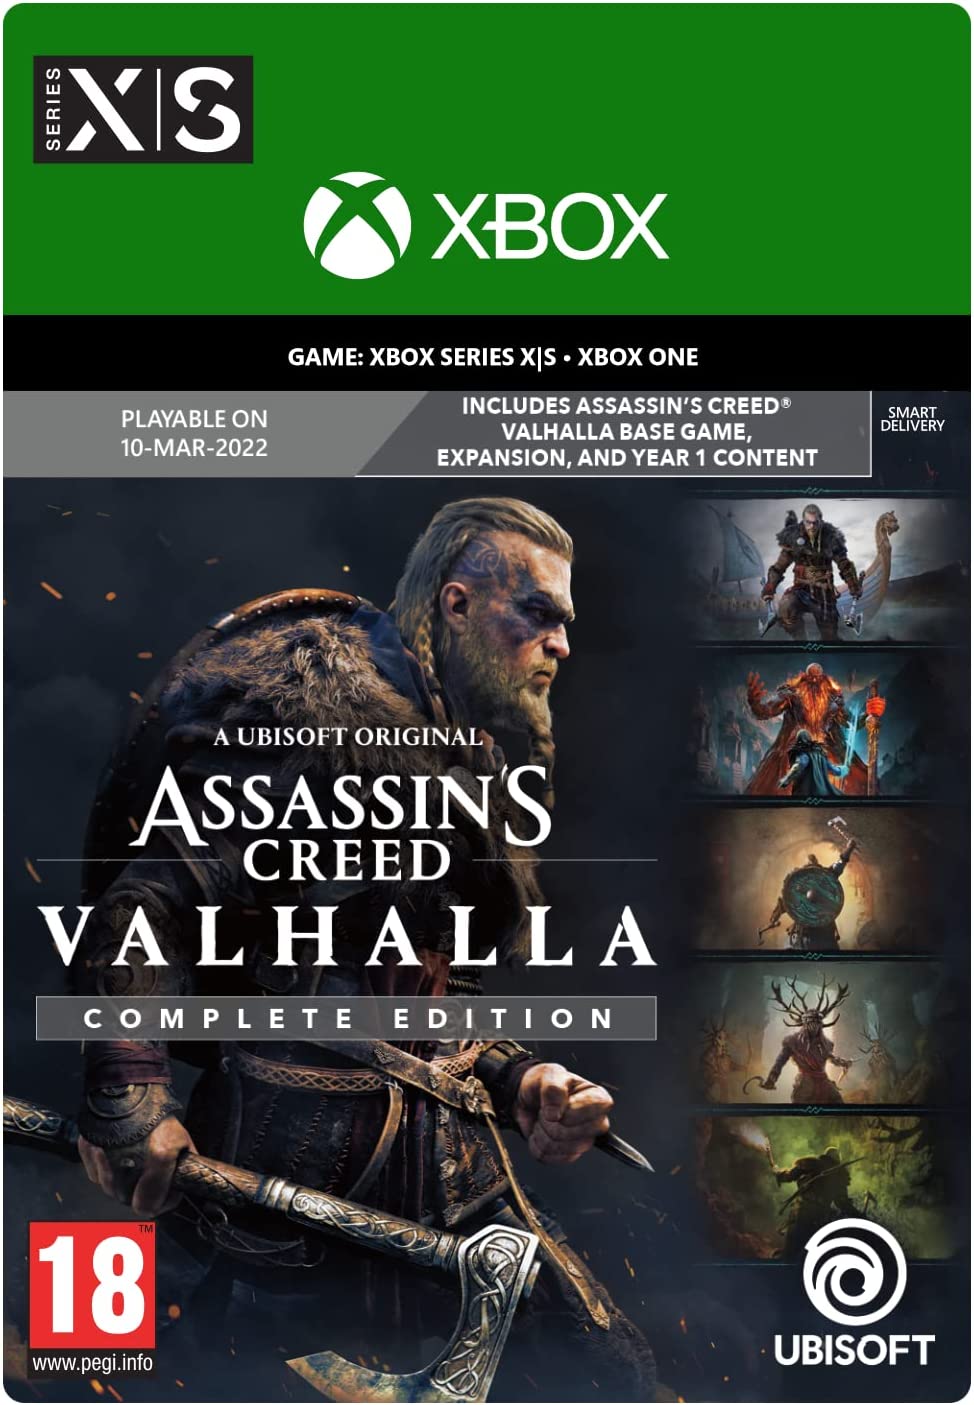 Buy cheap Assassin's Creed Valhalla cd key - lowest price